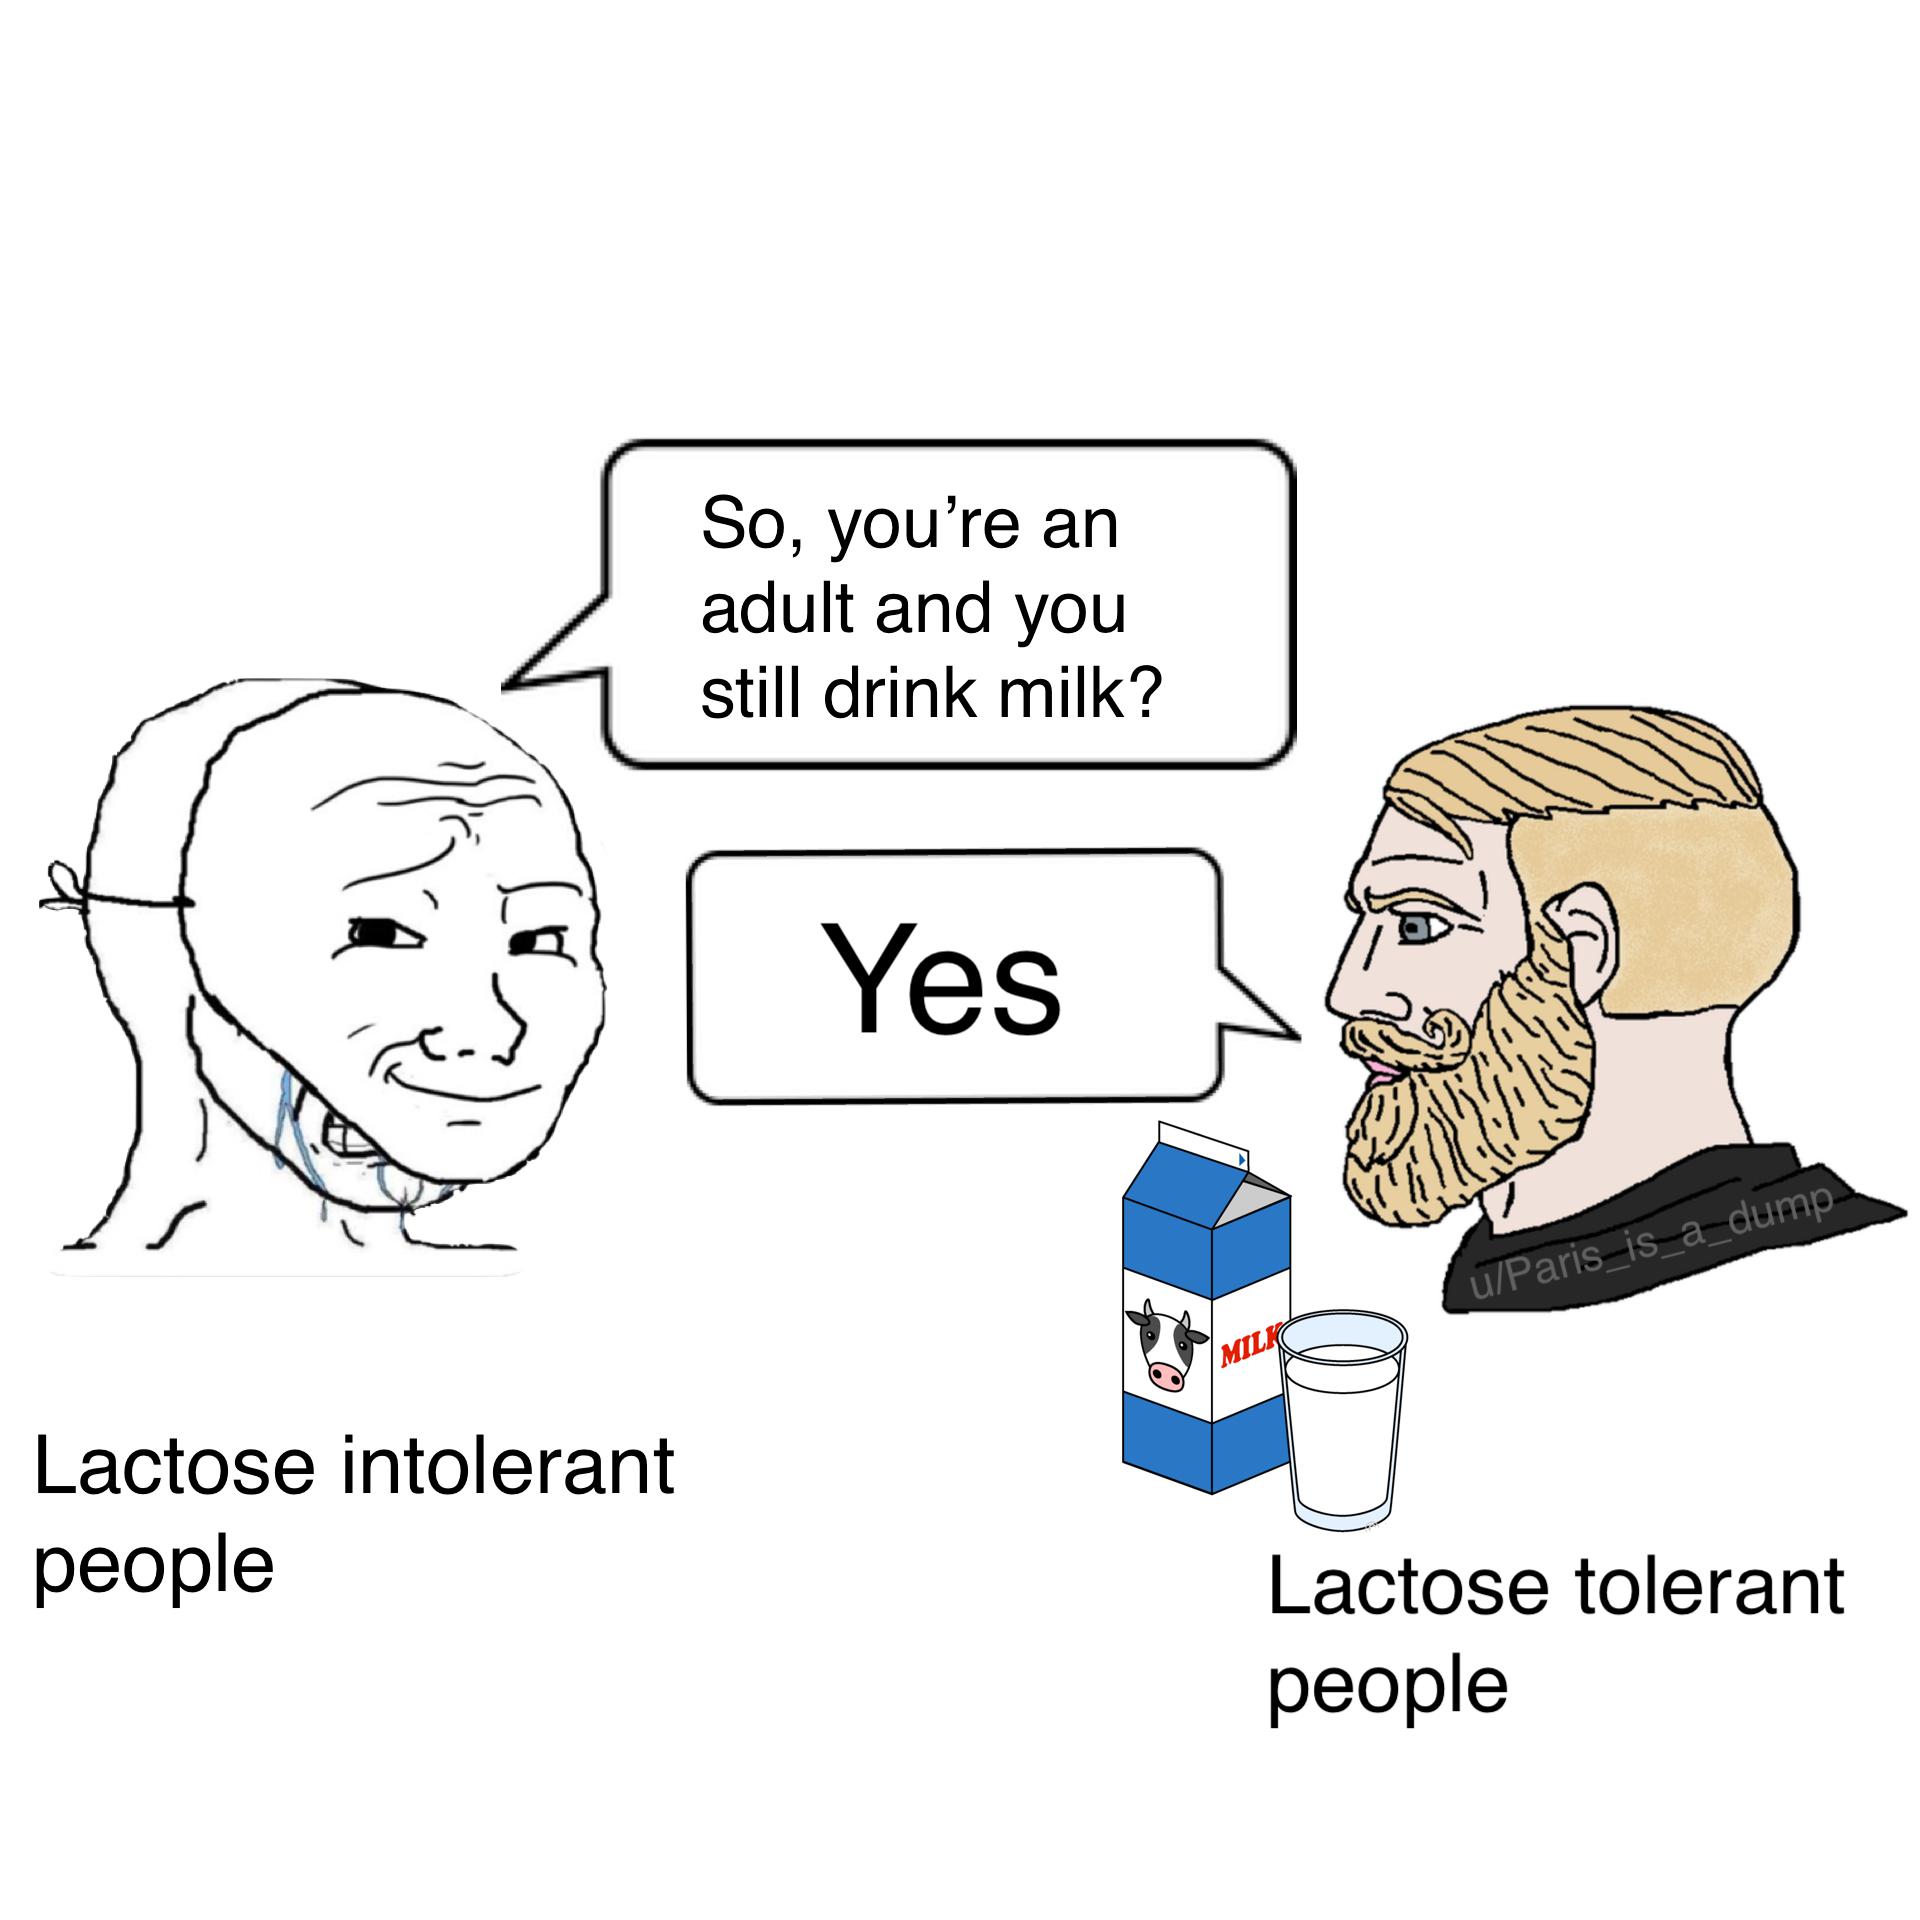 dank memes - cartoon -  Lactose intolerant people So, you're an adult and you still drink milk? Yes Milk uParis_is_a_dump. Lactose tolerant people